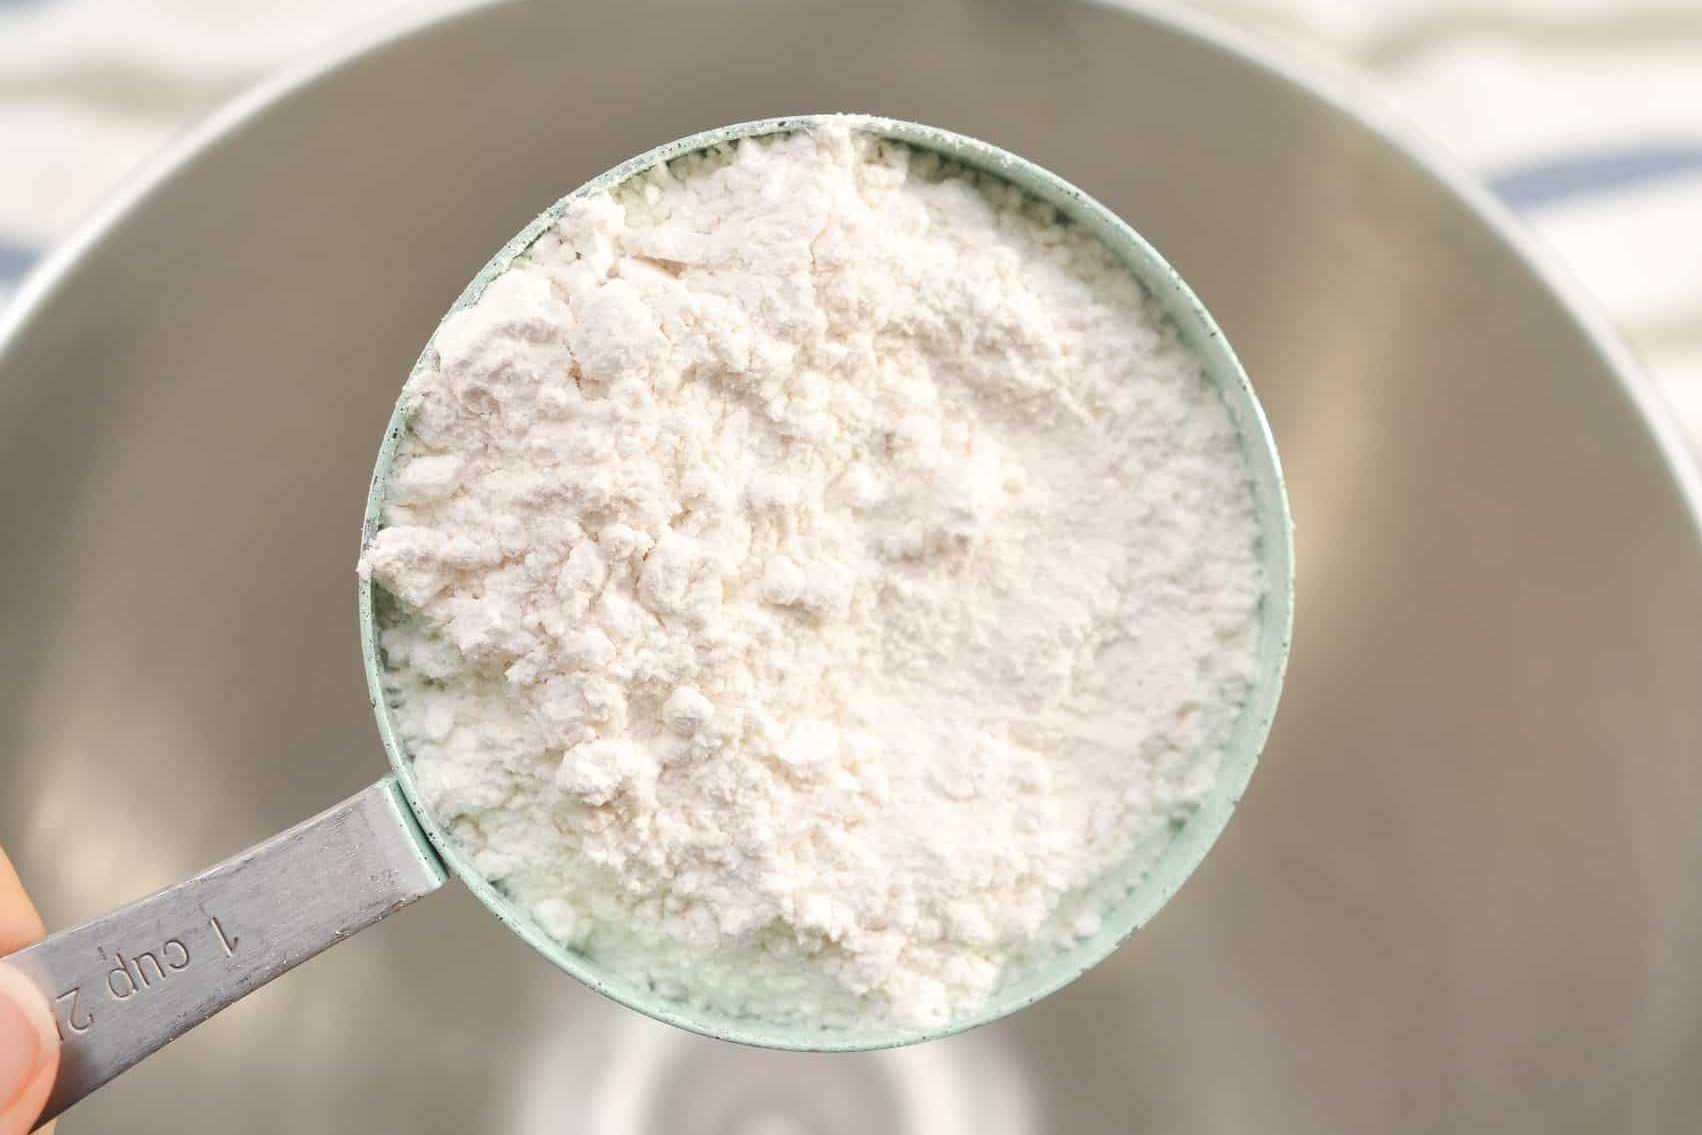 In a mixing bowl, add 2 cups of all-purpose flour.